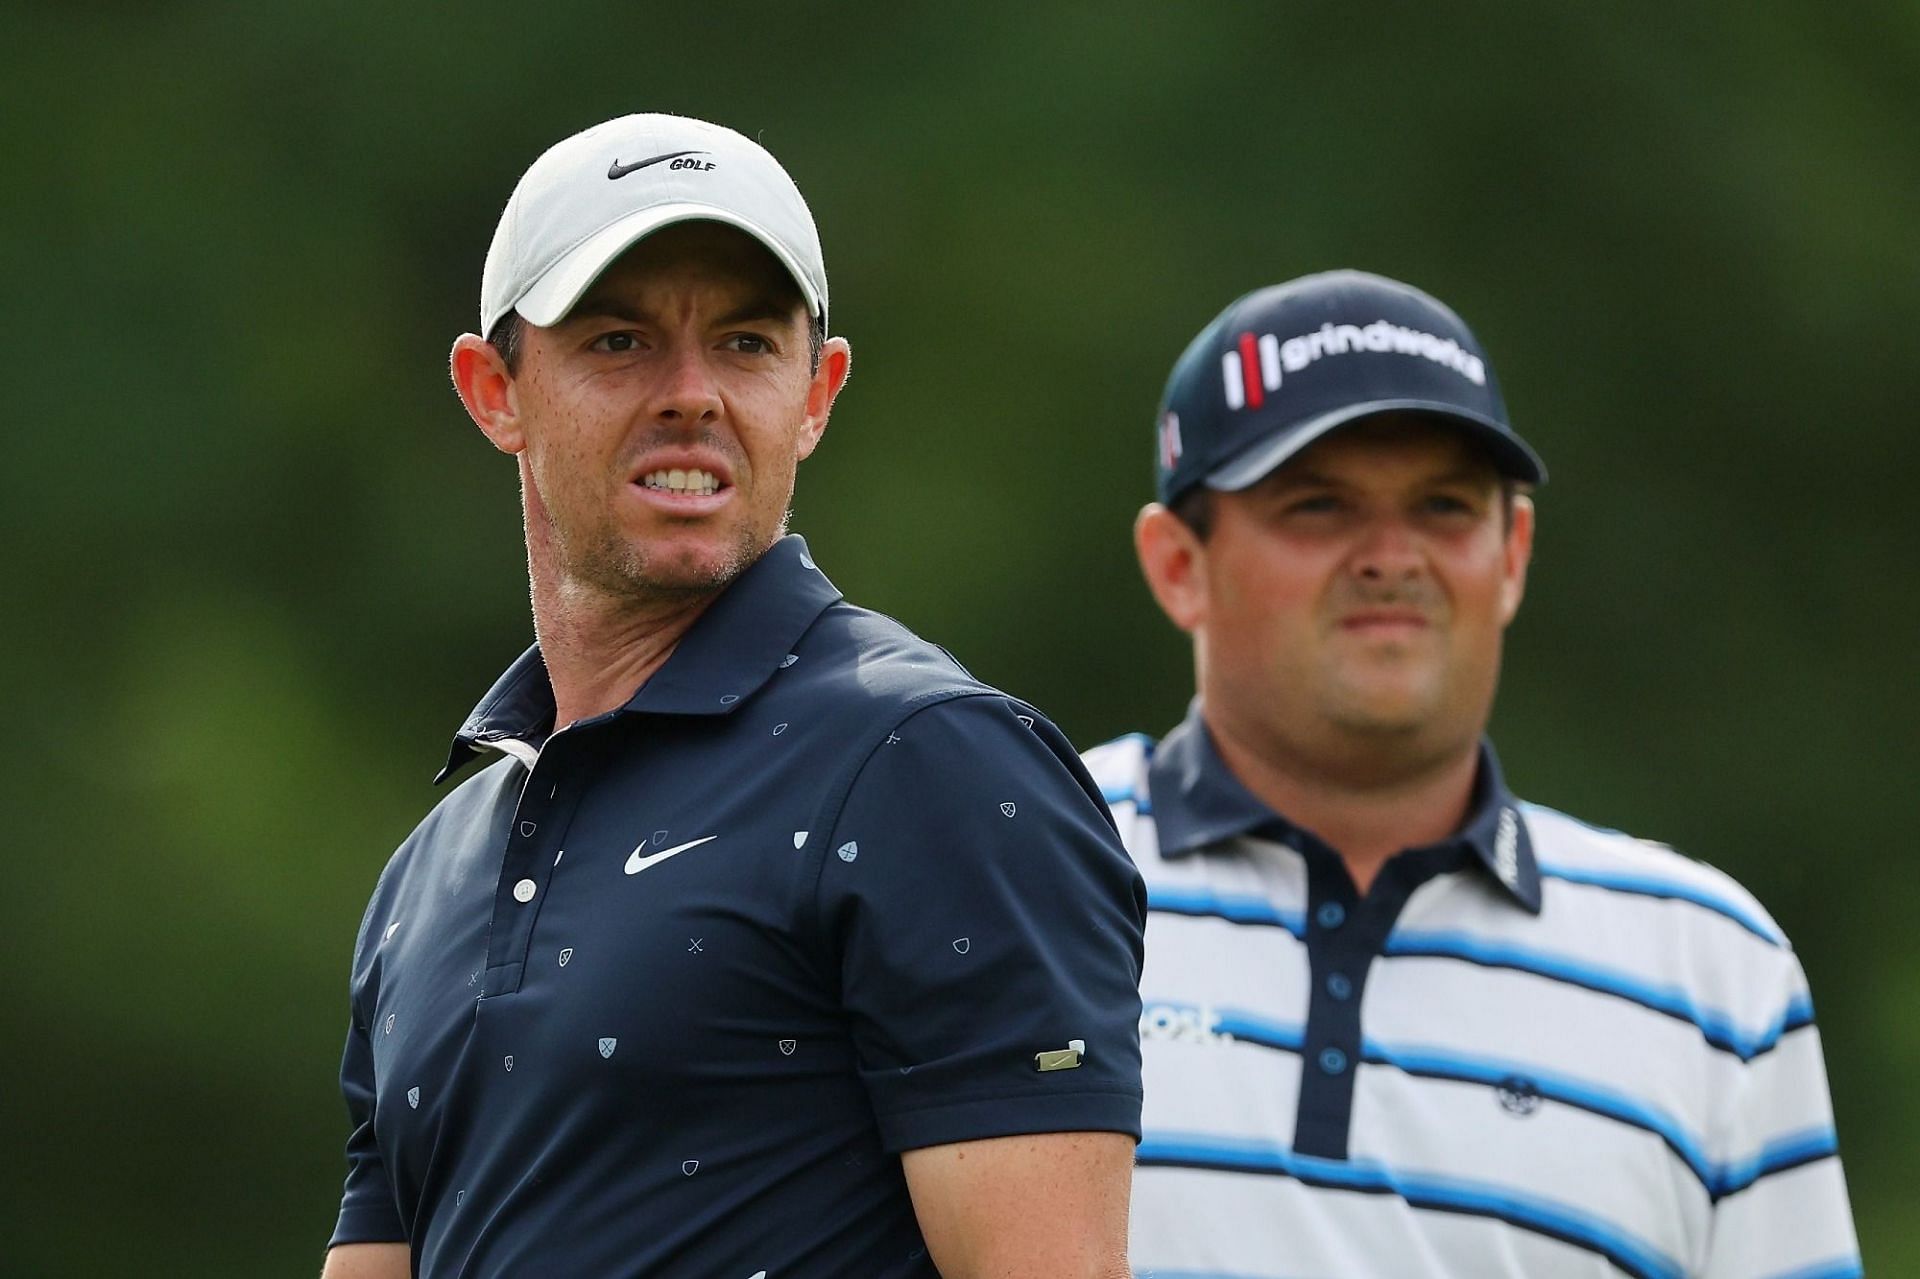 Patrick Reed reportedly threw tee in Rory